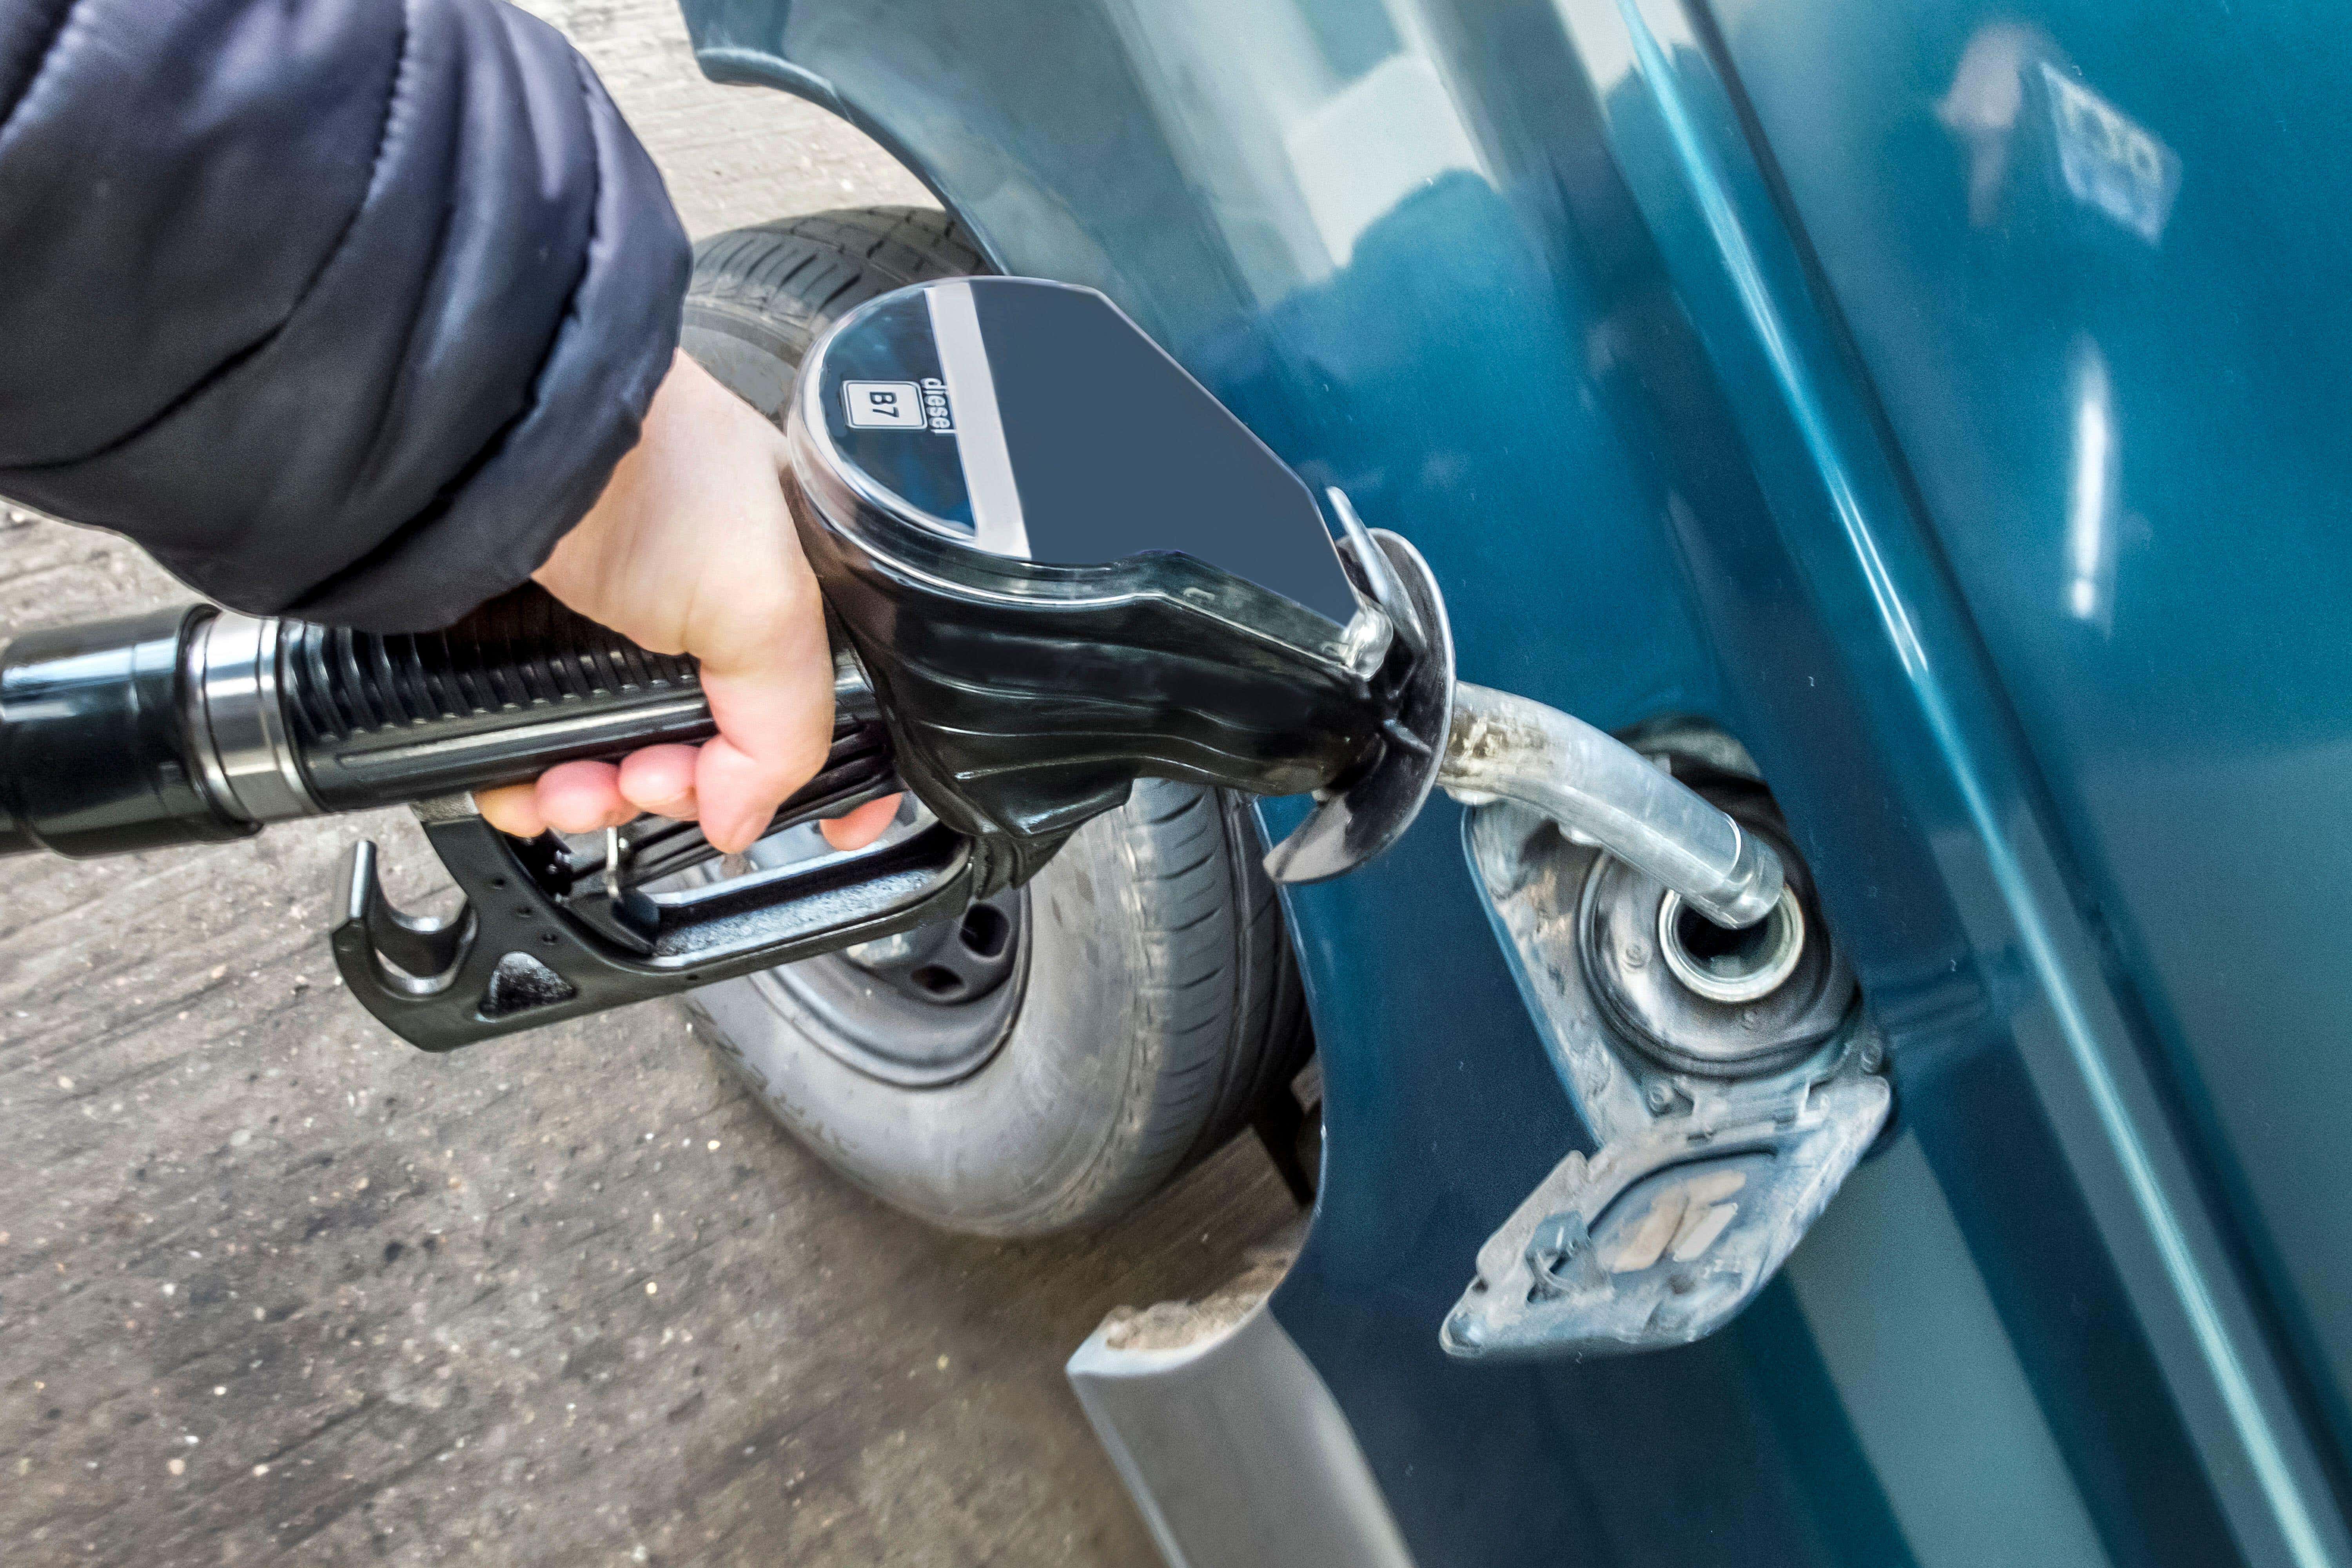 Drivers paid nearly £1 billion more for fuel at supermarkets last year due to increased margins, a recent investigation found